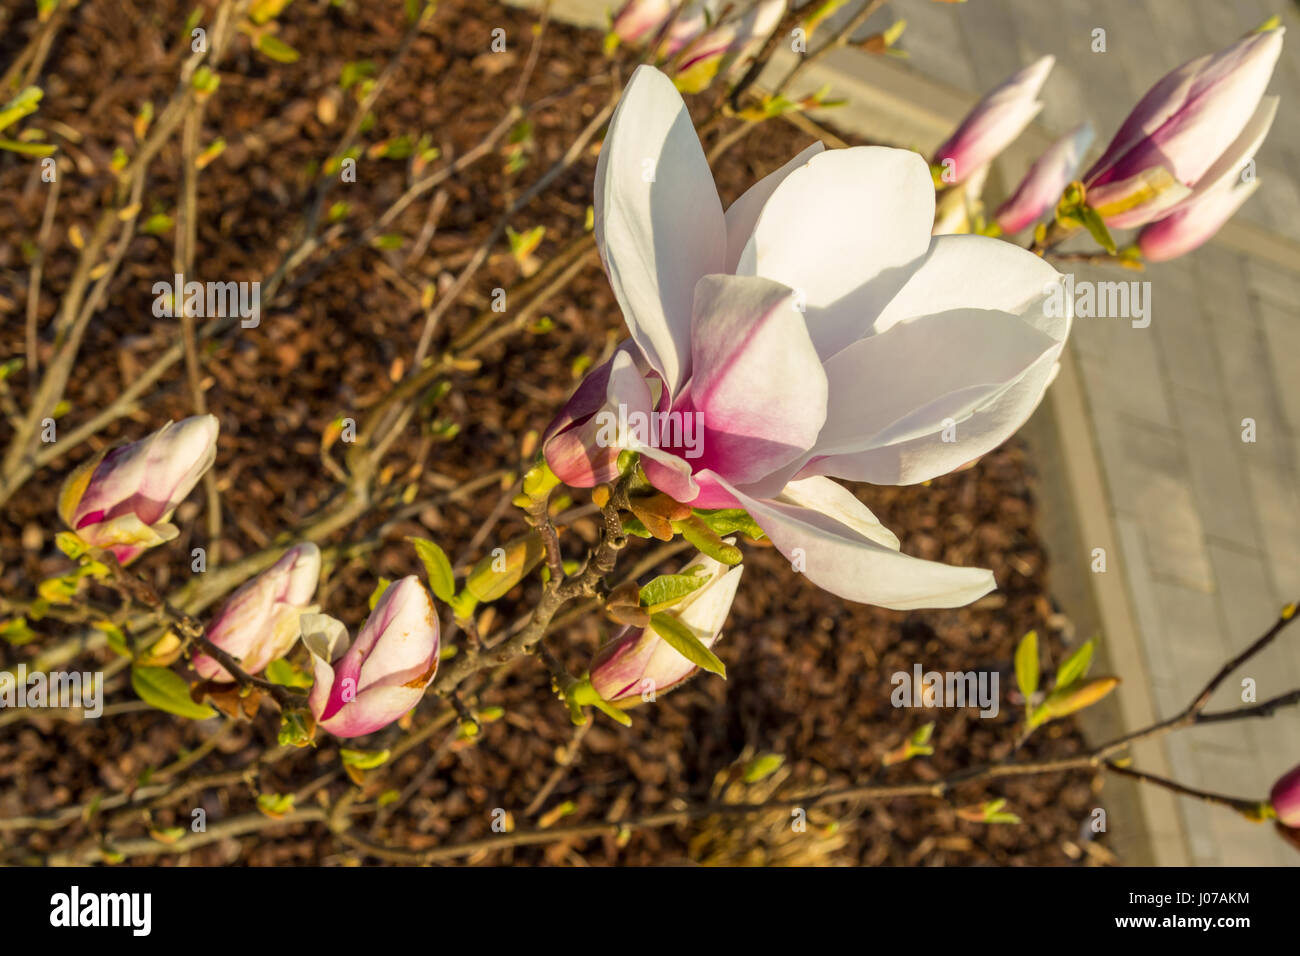 White and pink bloomed magnolia flower in the spring season on the magnolia tree. Wood chips and pavement bricks on the floor as background. Magnolia  Stock Photo